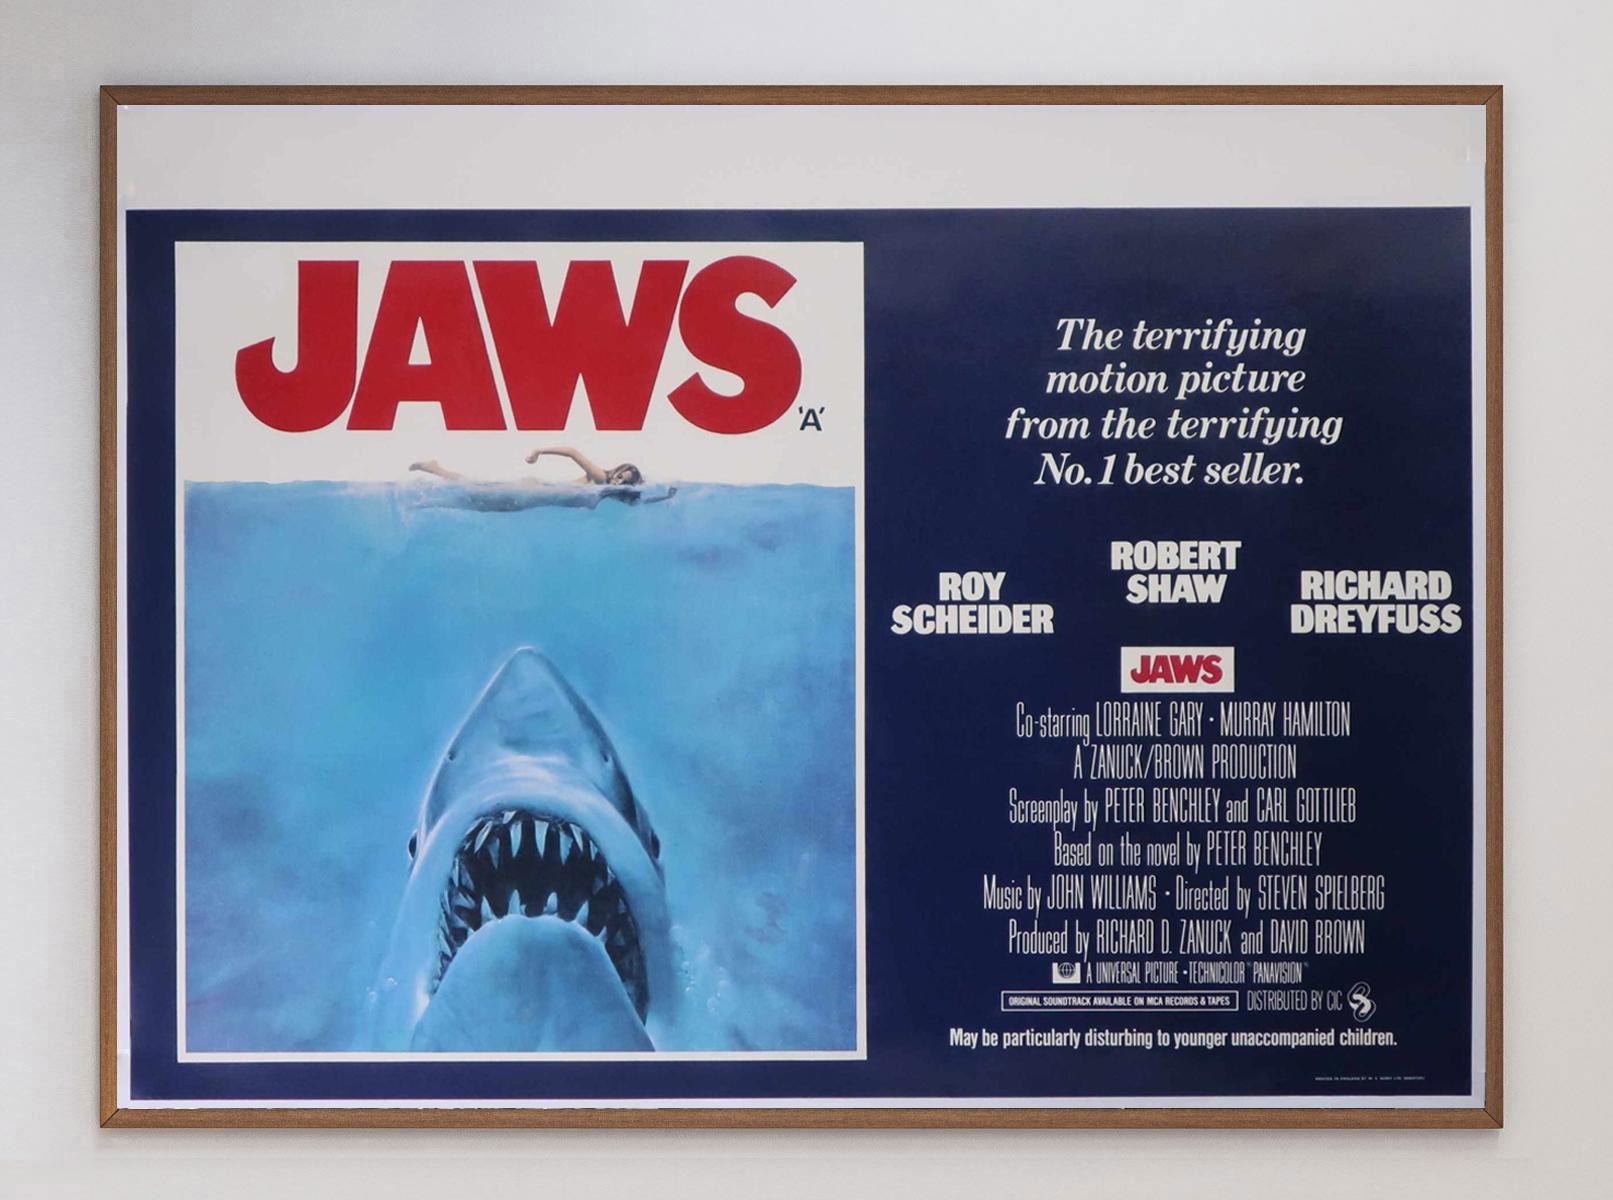 Jaws is a 1975 American thriller film directed by Steven Spielberg and based on Peter Benchley's 1974 novel of the same name.

Rewriting history in not only box office records but also the way that films would be released as summer blockbusters from